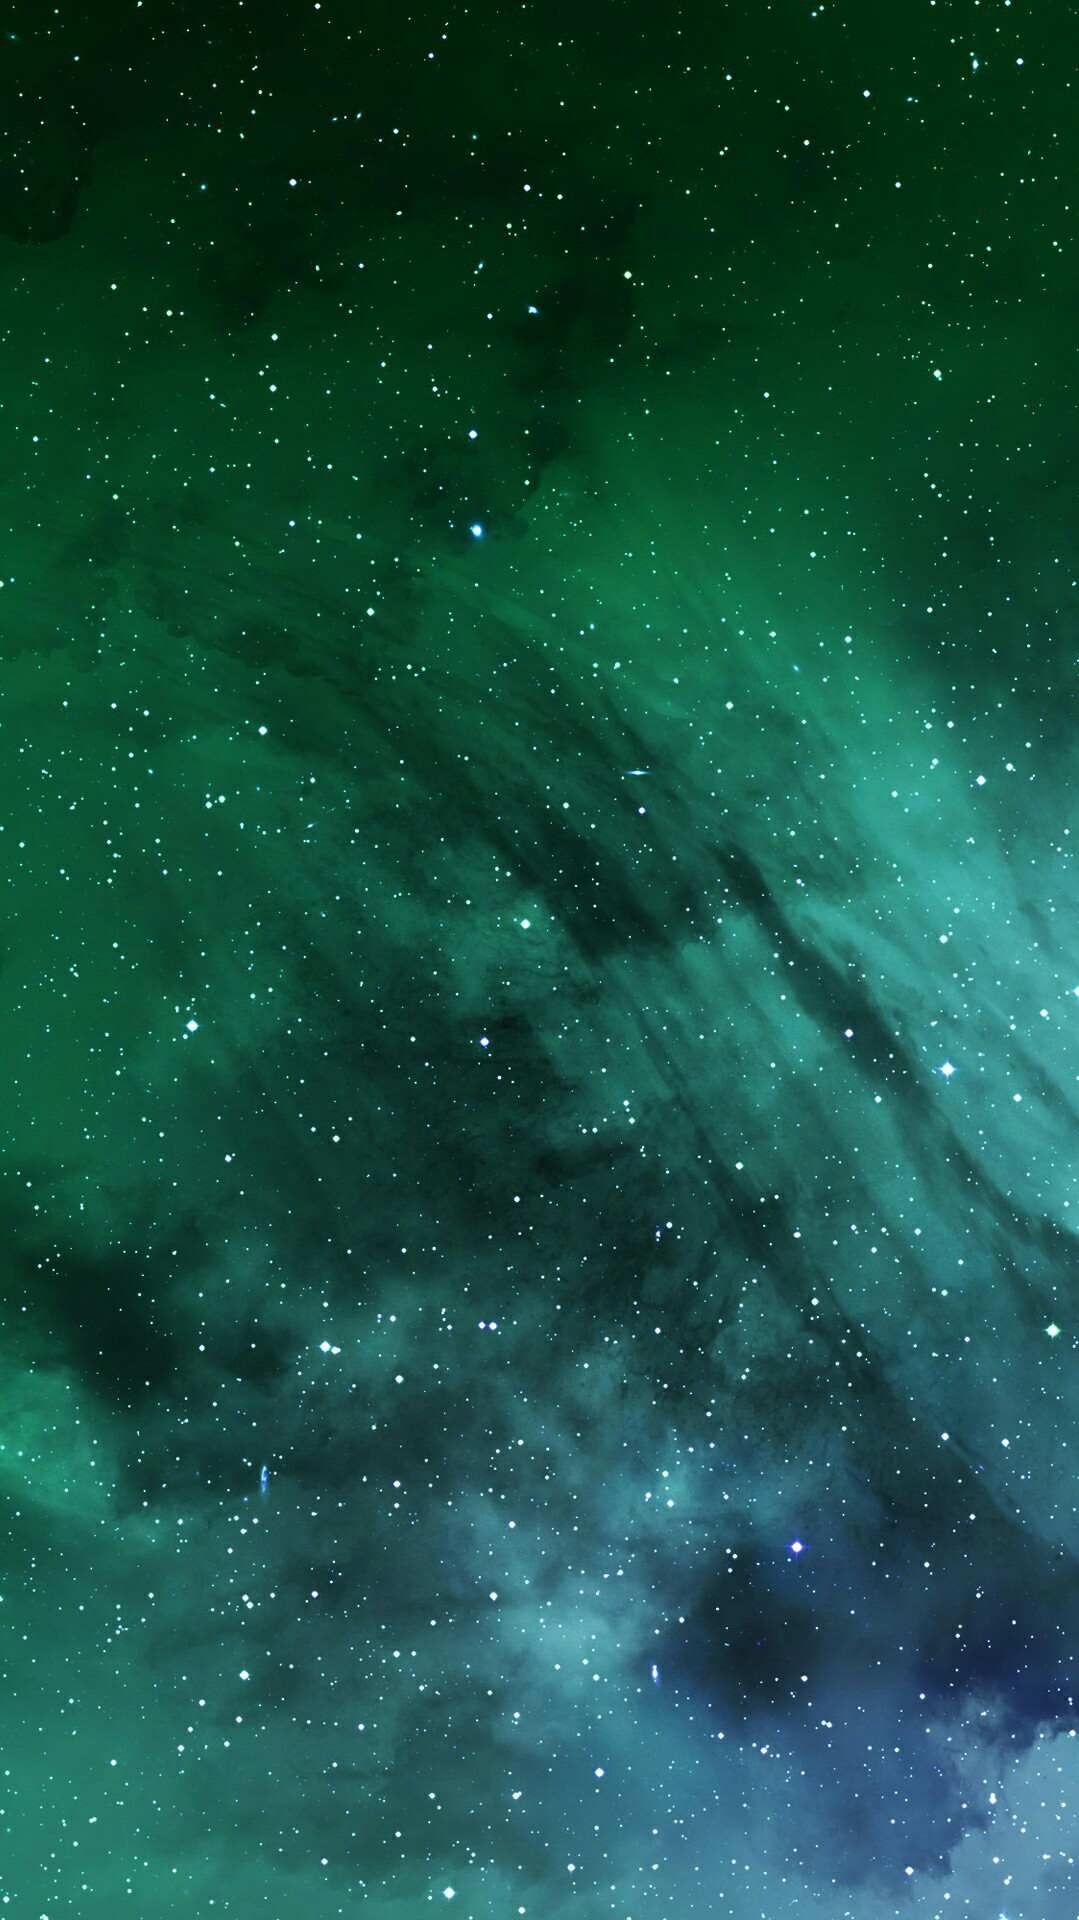 Download the new green iPhone 13 wallpapers right here  9to5Mac